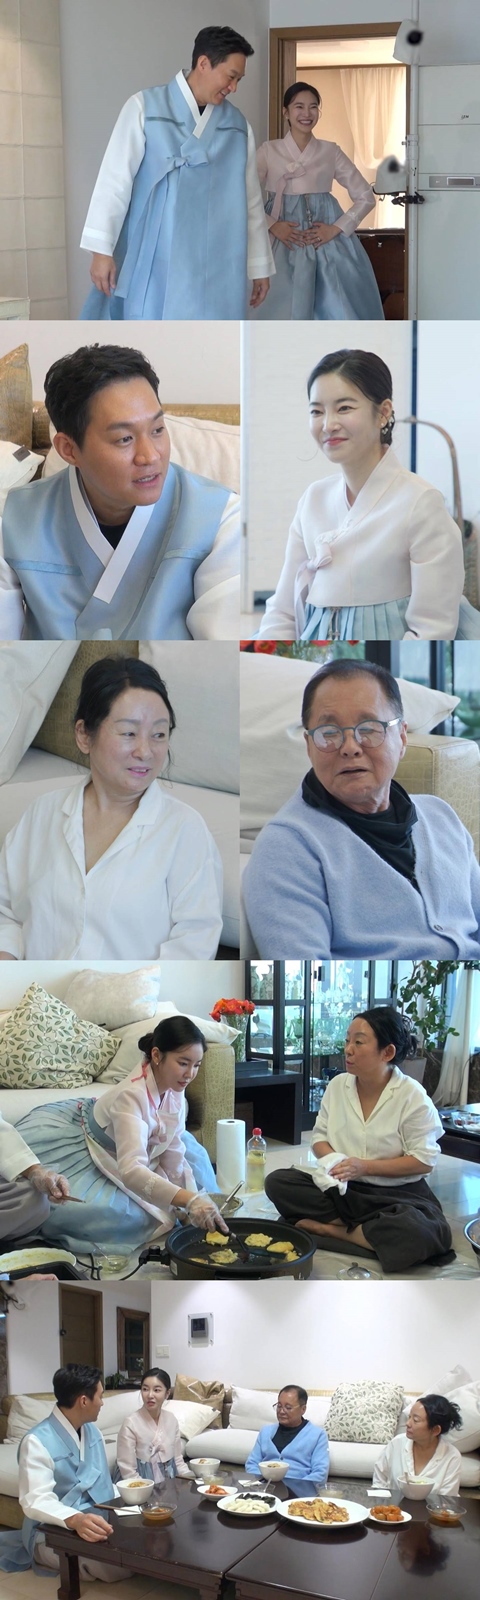 In Same Bed, Different Dreams 22 - You Are My Destiny, Kim Yoon-ji, Choi Woo-sungs first holiday after marriage is drawn.On the 31st, the special SBS entertainment program Same Bed, Different Dreams 22 - You Are My Destiny (hereinafter referred to as Same Bed, Different Dreams 22) reveals Kim Yoon-ji and Choi Woo-sungs daily life.Kim Yoon-ji, Choi Woo-sung visited the house of Kim Young-im, who was a parent-in-law, on the first holiday after marriage.It was to help make food for her mother-in-law Kim Young-im, who has been preparing for the holiday alone for about 45 years.Kim Yoon-ji, despite Kim Young-ims disapproval, said he wanted to receive the secret law and attracted everyones admiration.Kim Yoon-ji, who was a brilliant Top Model, was embarrassed to see the ingredients prepared by big hand Kim Young-im.The first holiday dish of Kim Yoon-ji, Top Model, will be released on the air, as it started with 100 pieces of the North Korean Mungdujeon and was waiting for a big difficulty to the North Korean cold noodles with three secrets.Also, it was strange that I was impressed by the surprise of the marriage anniversary a while ago, and Kim Young-im came back to the usual tit-for-tat fight and laughed.The two men grew more and more vocal and the atmosphere overheated, so Kim Yoon-ji showed off his term and proposed a strange reconciliation method.Kim Yoon-jis surprise proposal is strange that he jumped up from his seat and tried to escape and was angry.Kim Yoon-jis extraordinary reconciliation method, which angered the strange, raises questions about what will happen.Then Kim Yoon-ji stormed the sudden action of his father-in-law, Lee Sang-hae.The rumor is that Kim Yoon-ji and Kim Young-im were suddenly standing up during the meal and immediately followed the action.SBS is provided.